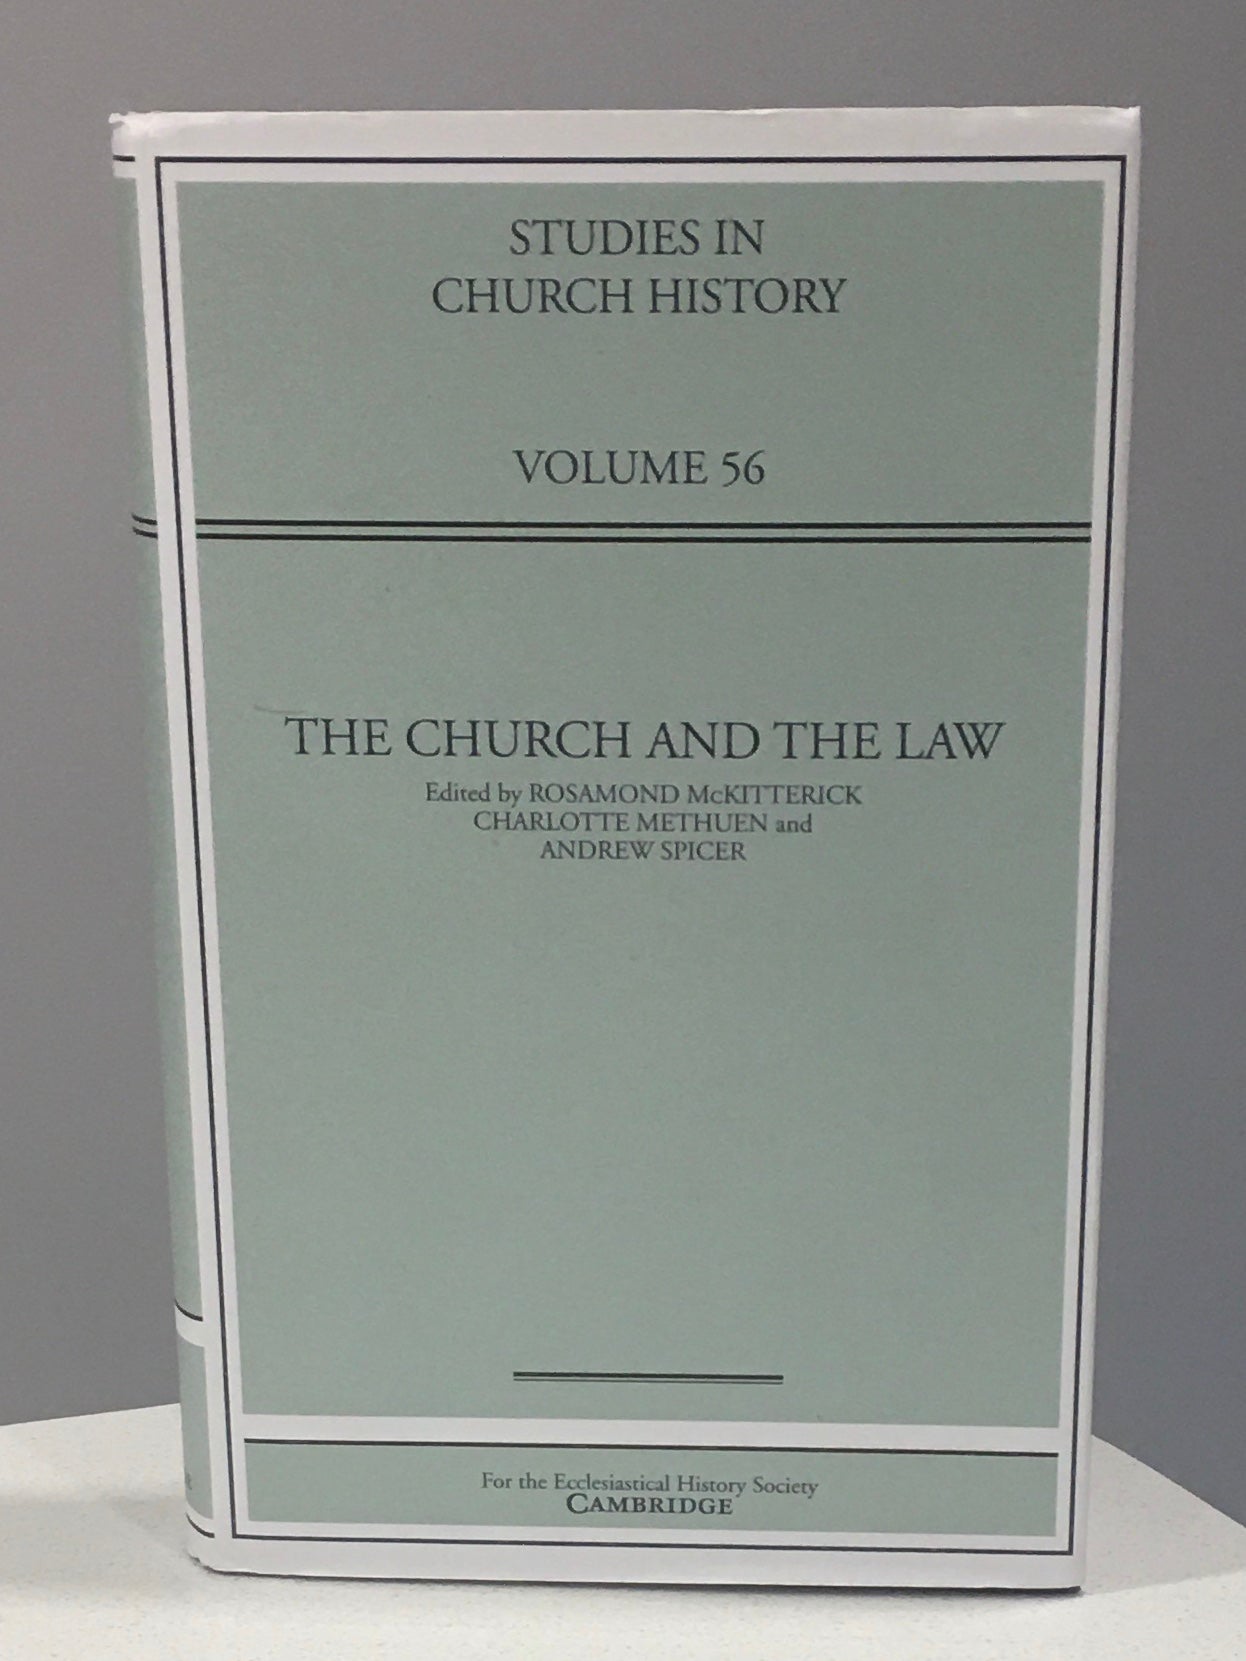 The Church and the Law   Studies in Church History   Volume 56